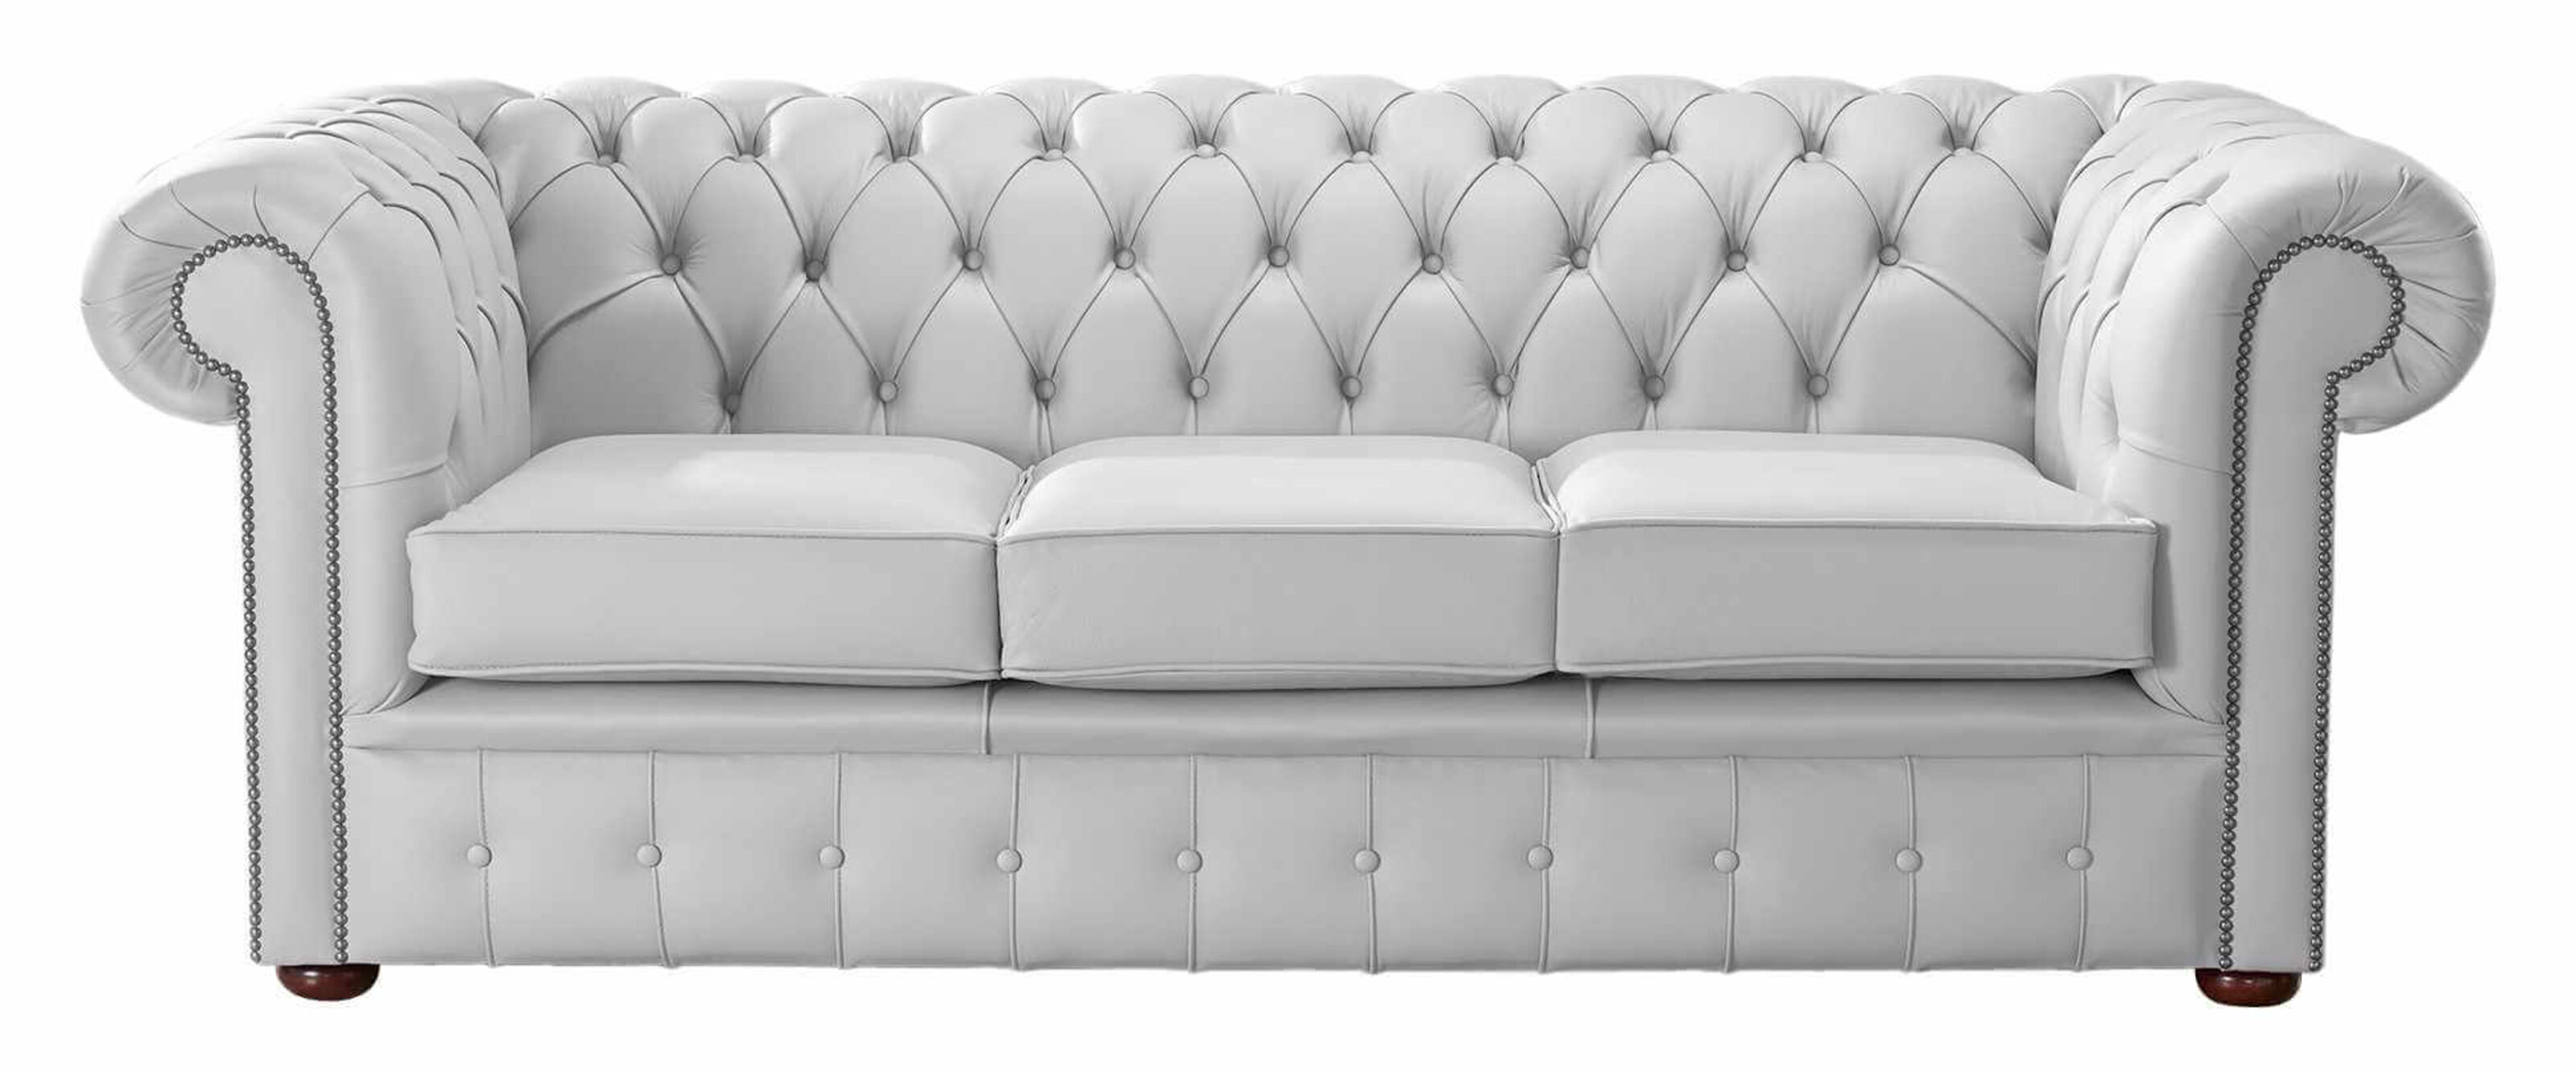 Chesterfield Sofas A Symphony of Craftsmanship from Their Hometown  %Post Title